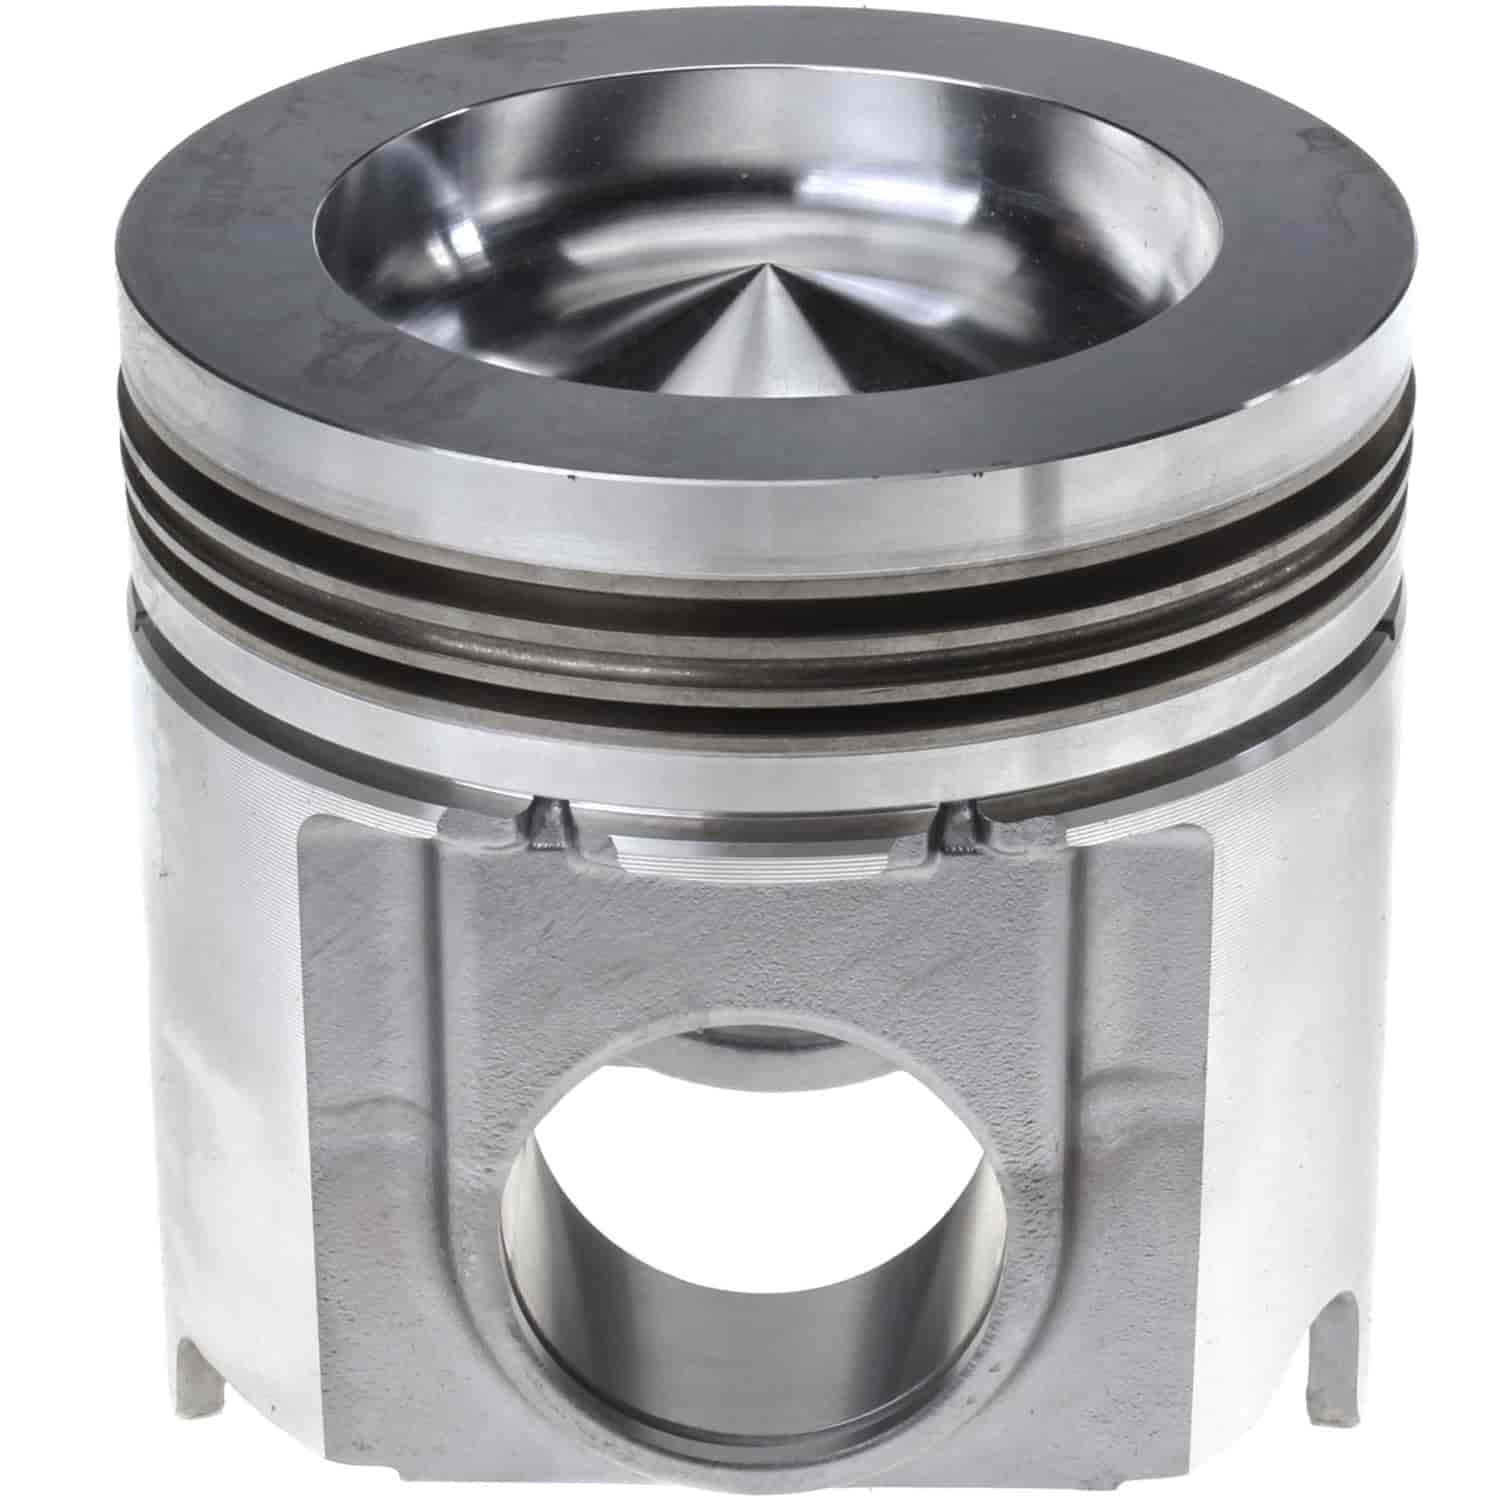 Piston Without Piston Pin Caterpillar 3406B and 3406C 14.5 1 Compression Ratio 460HP